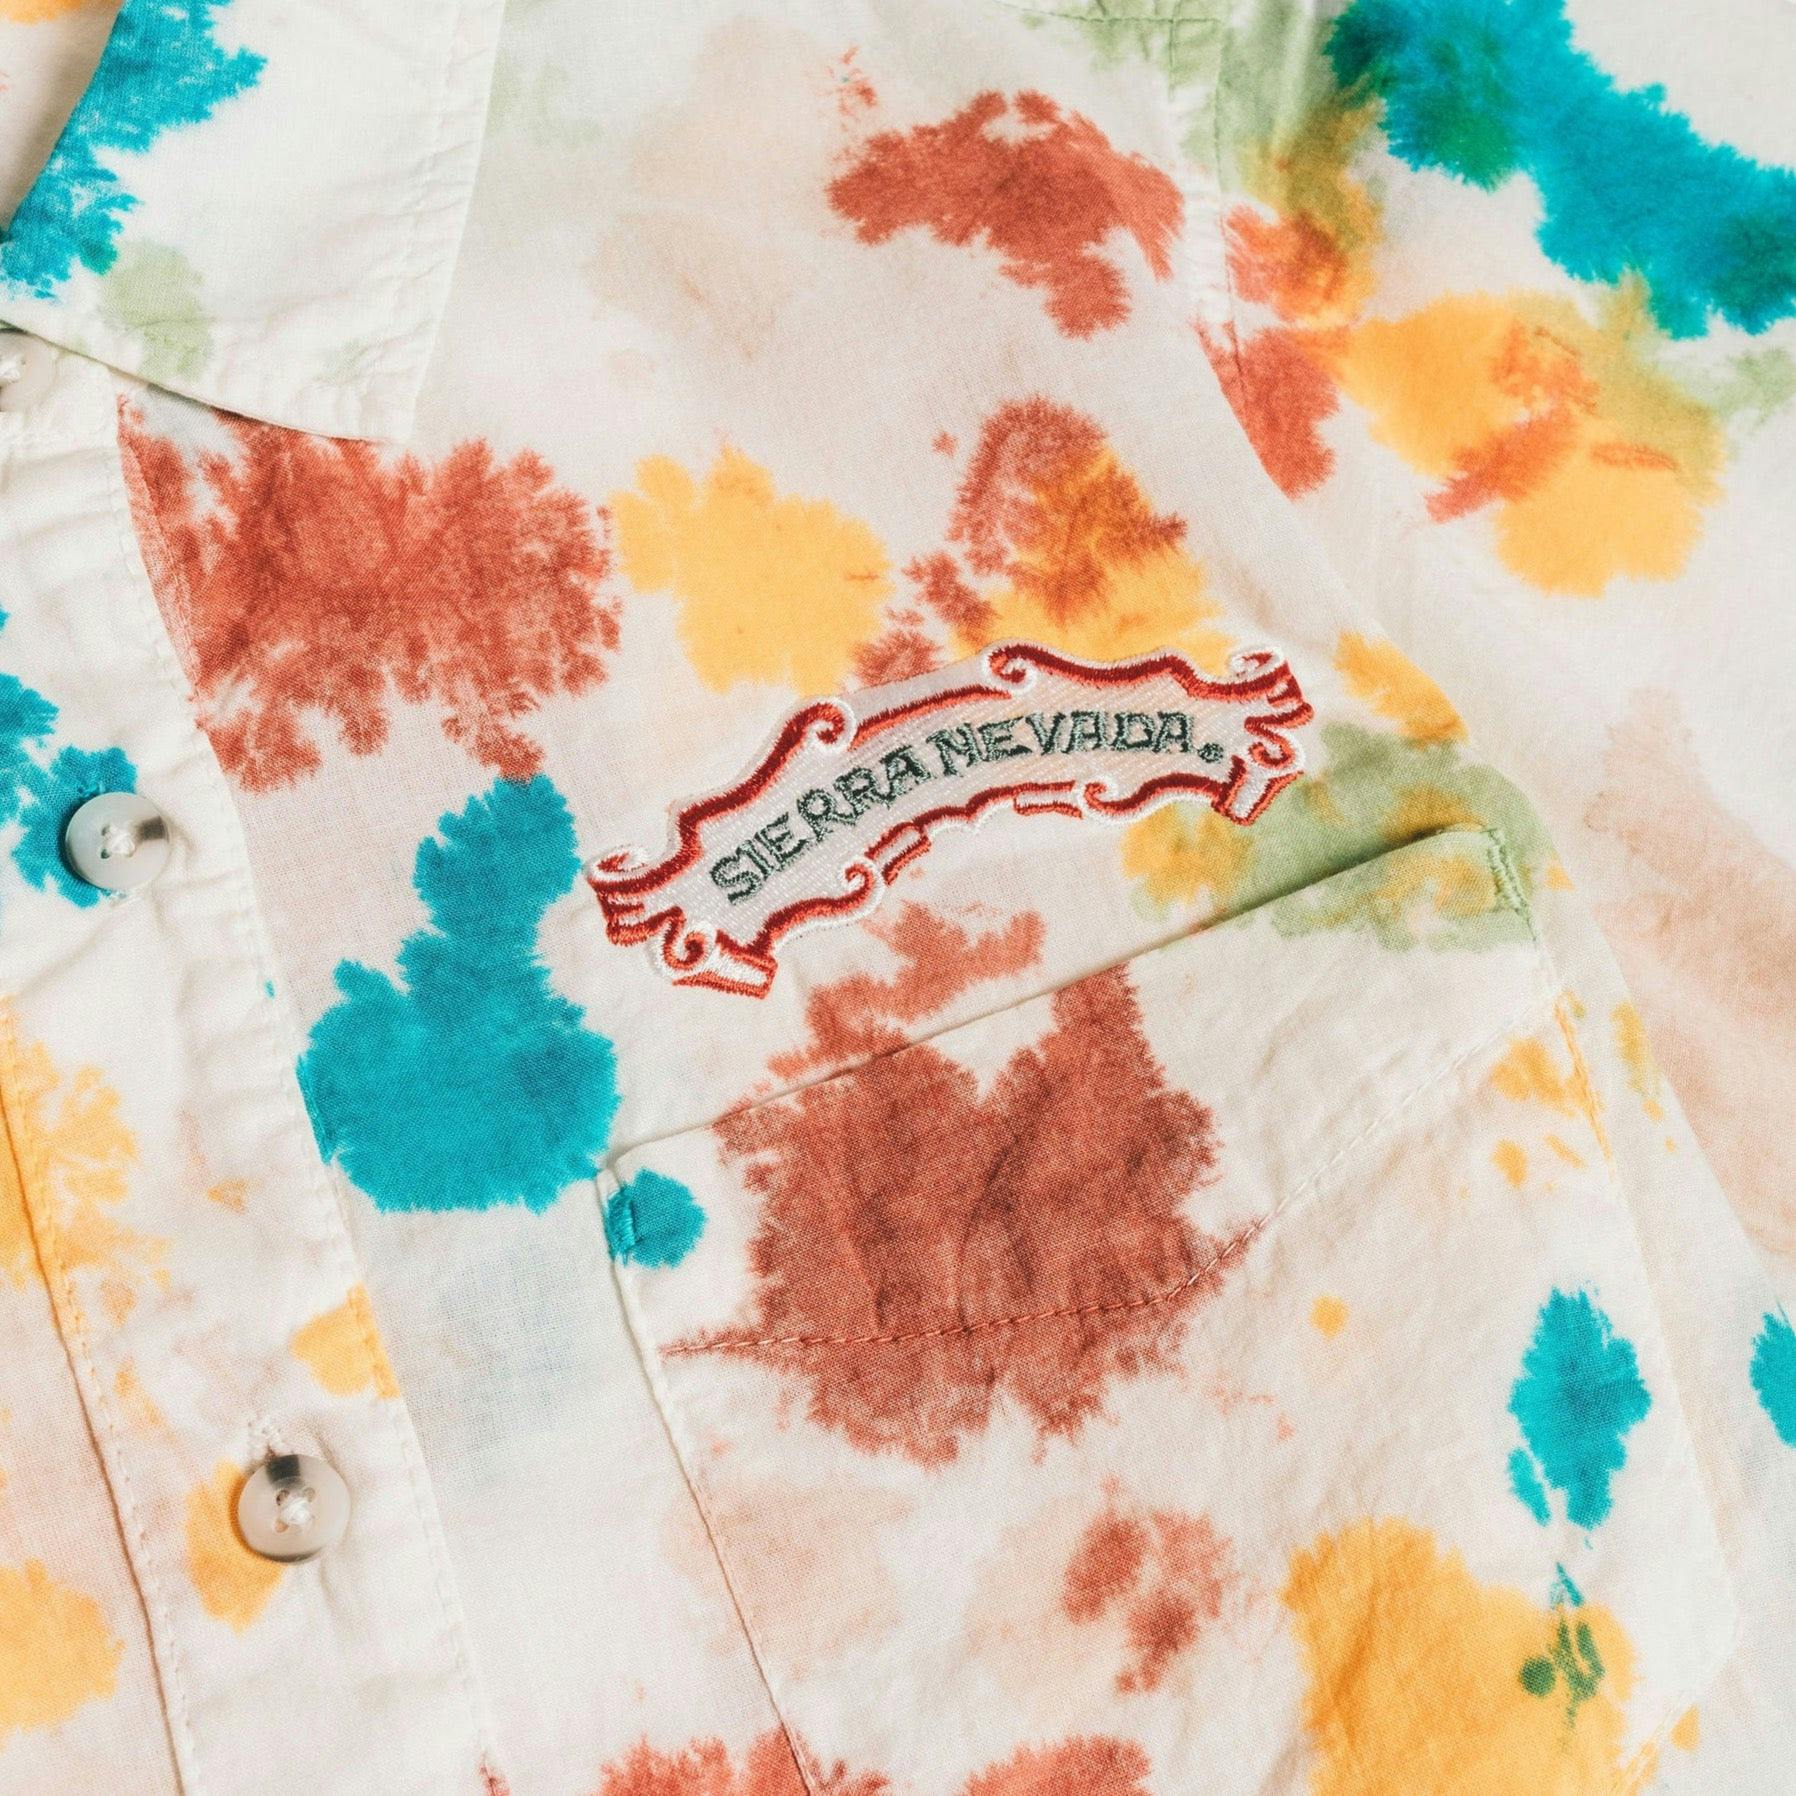 Sierra Nevada X Kavu detail image of embroidered Sierra Nevada logo on the Party Happy Tie Dye button down shirt